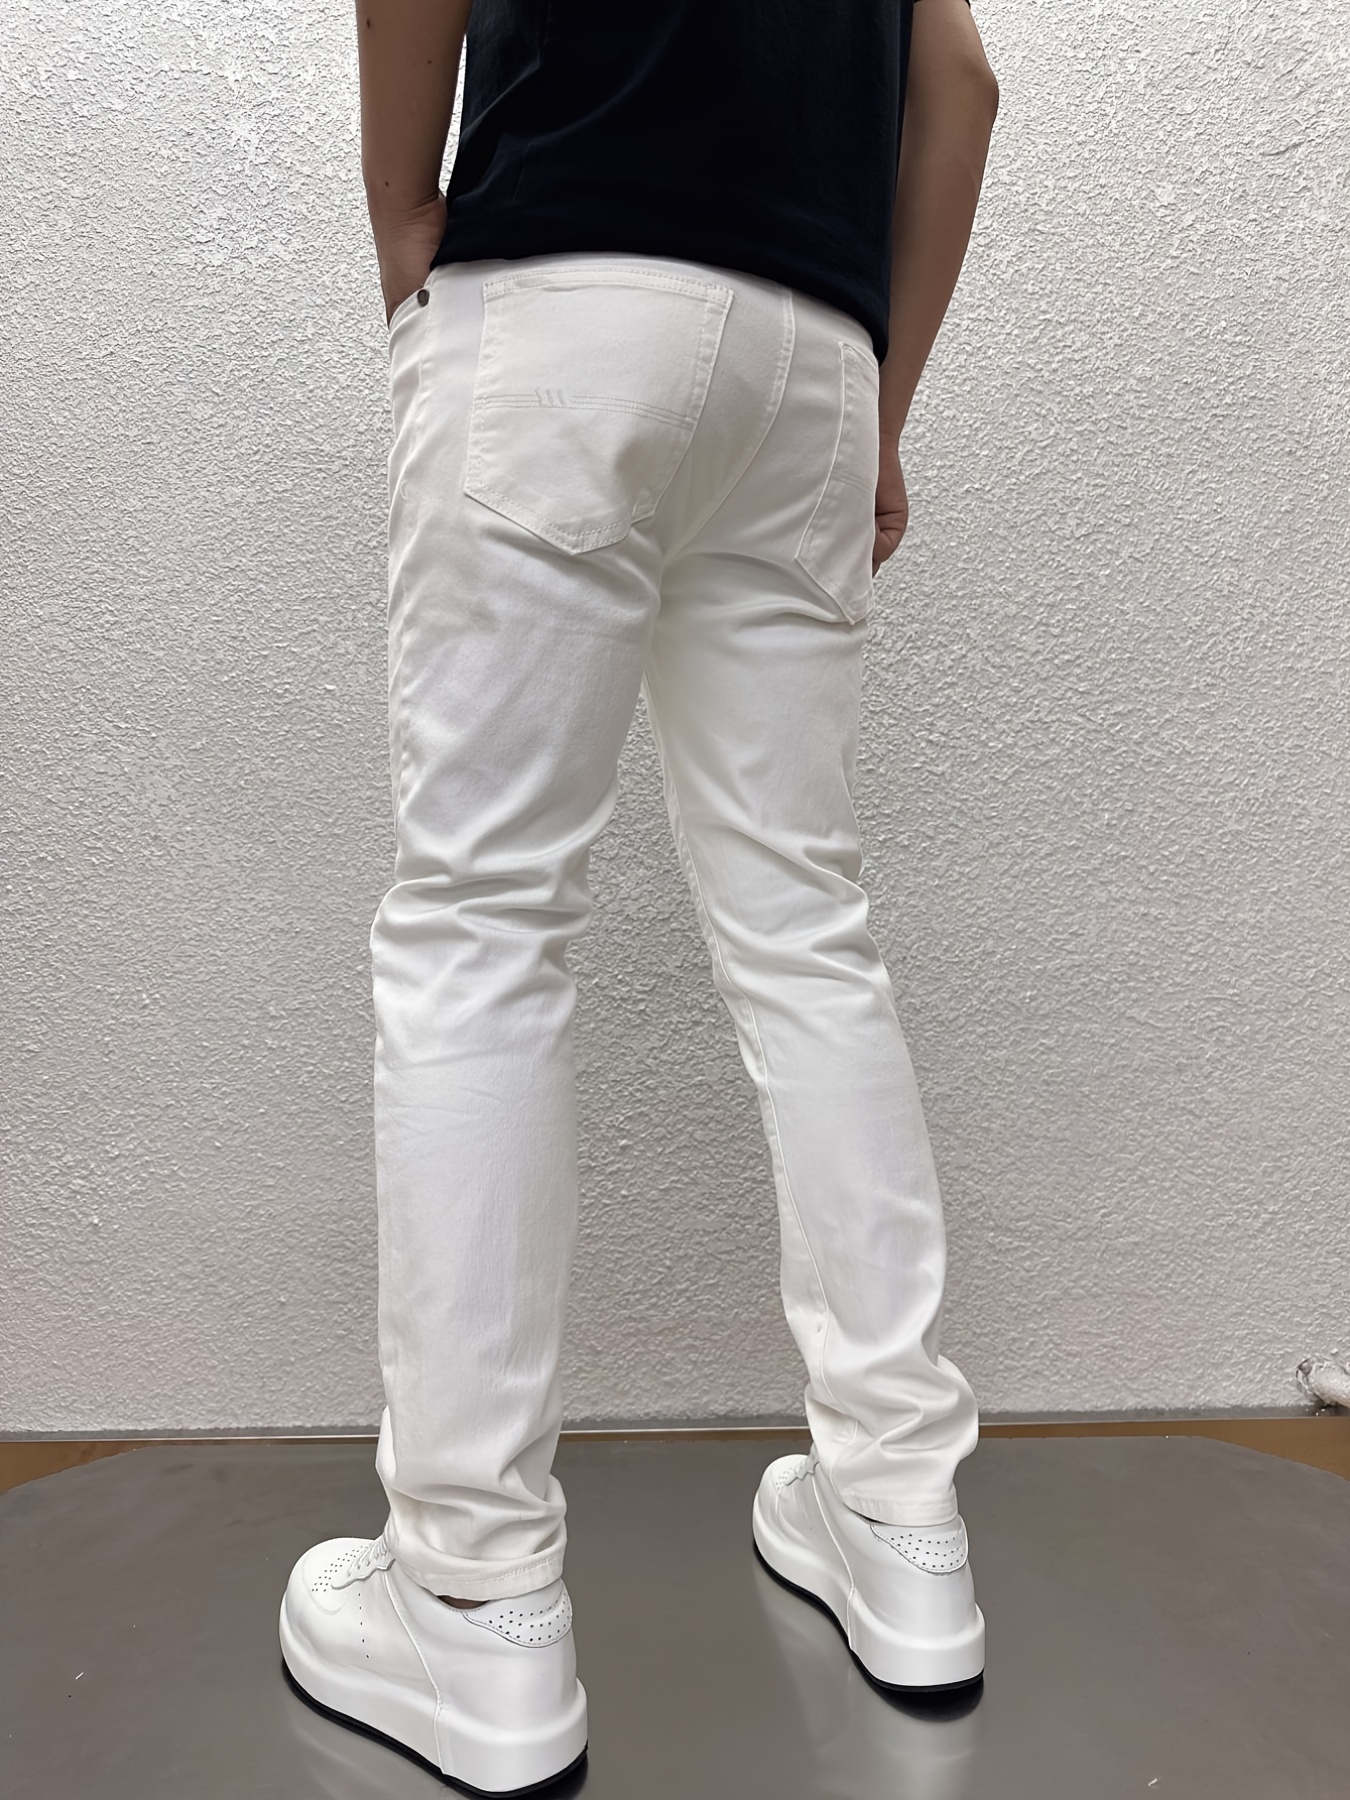 2023 Men's White Jeans Fashion Casual Classic Style Slim Fit Soft